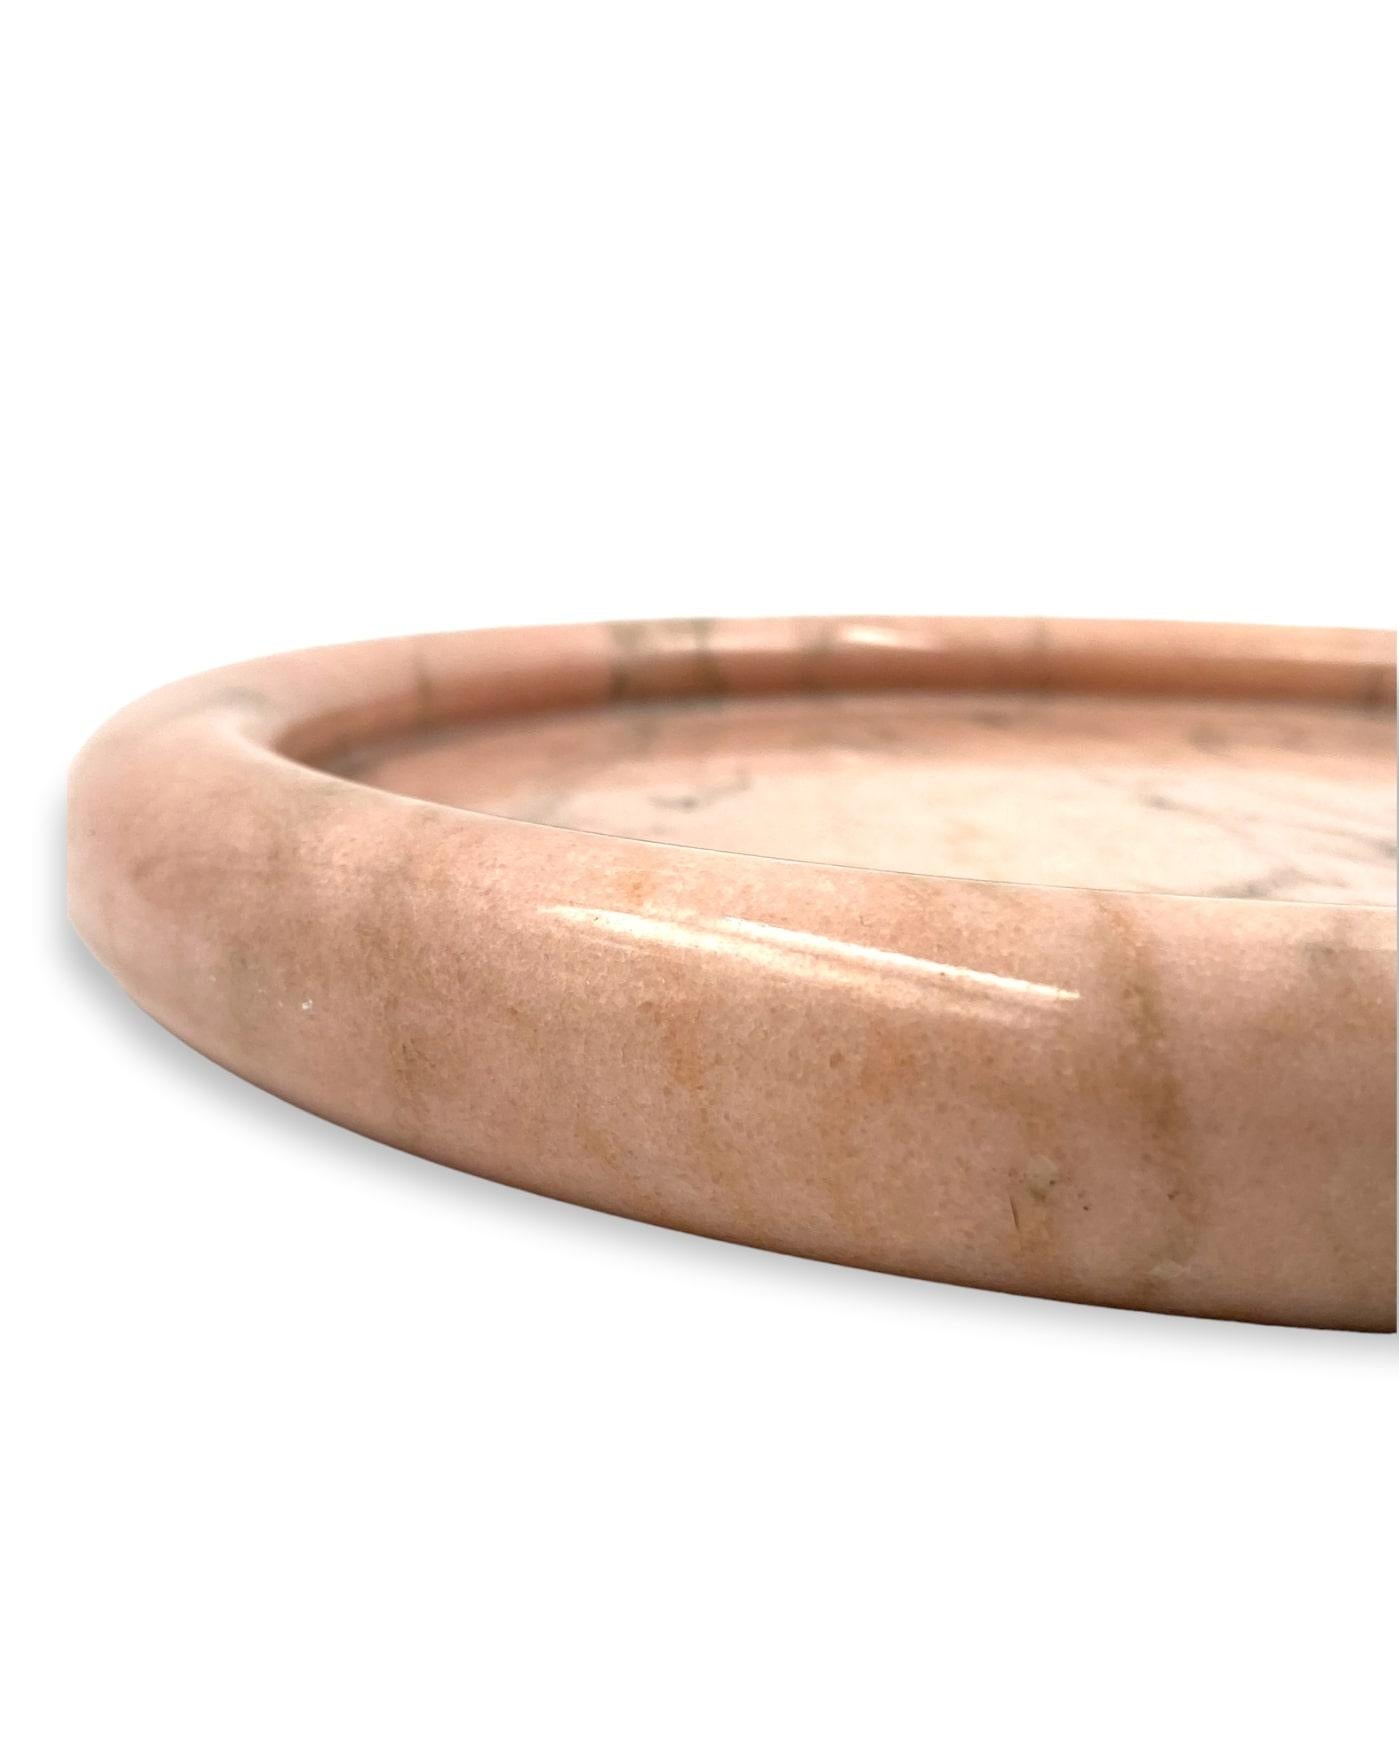 Sergio Asti, Pink Portuguese Marble Centerpiece / Tray, Up&Up Italy, 1970s For Sale 7